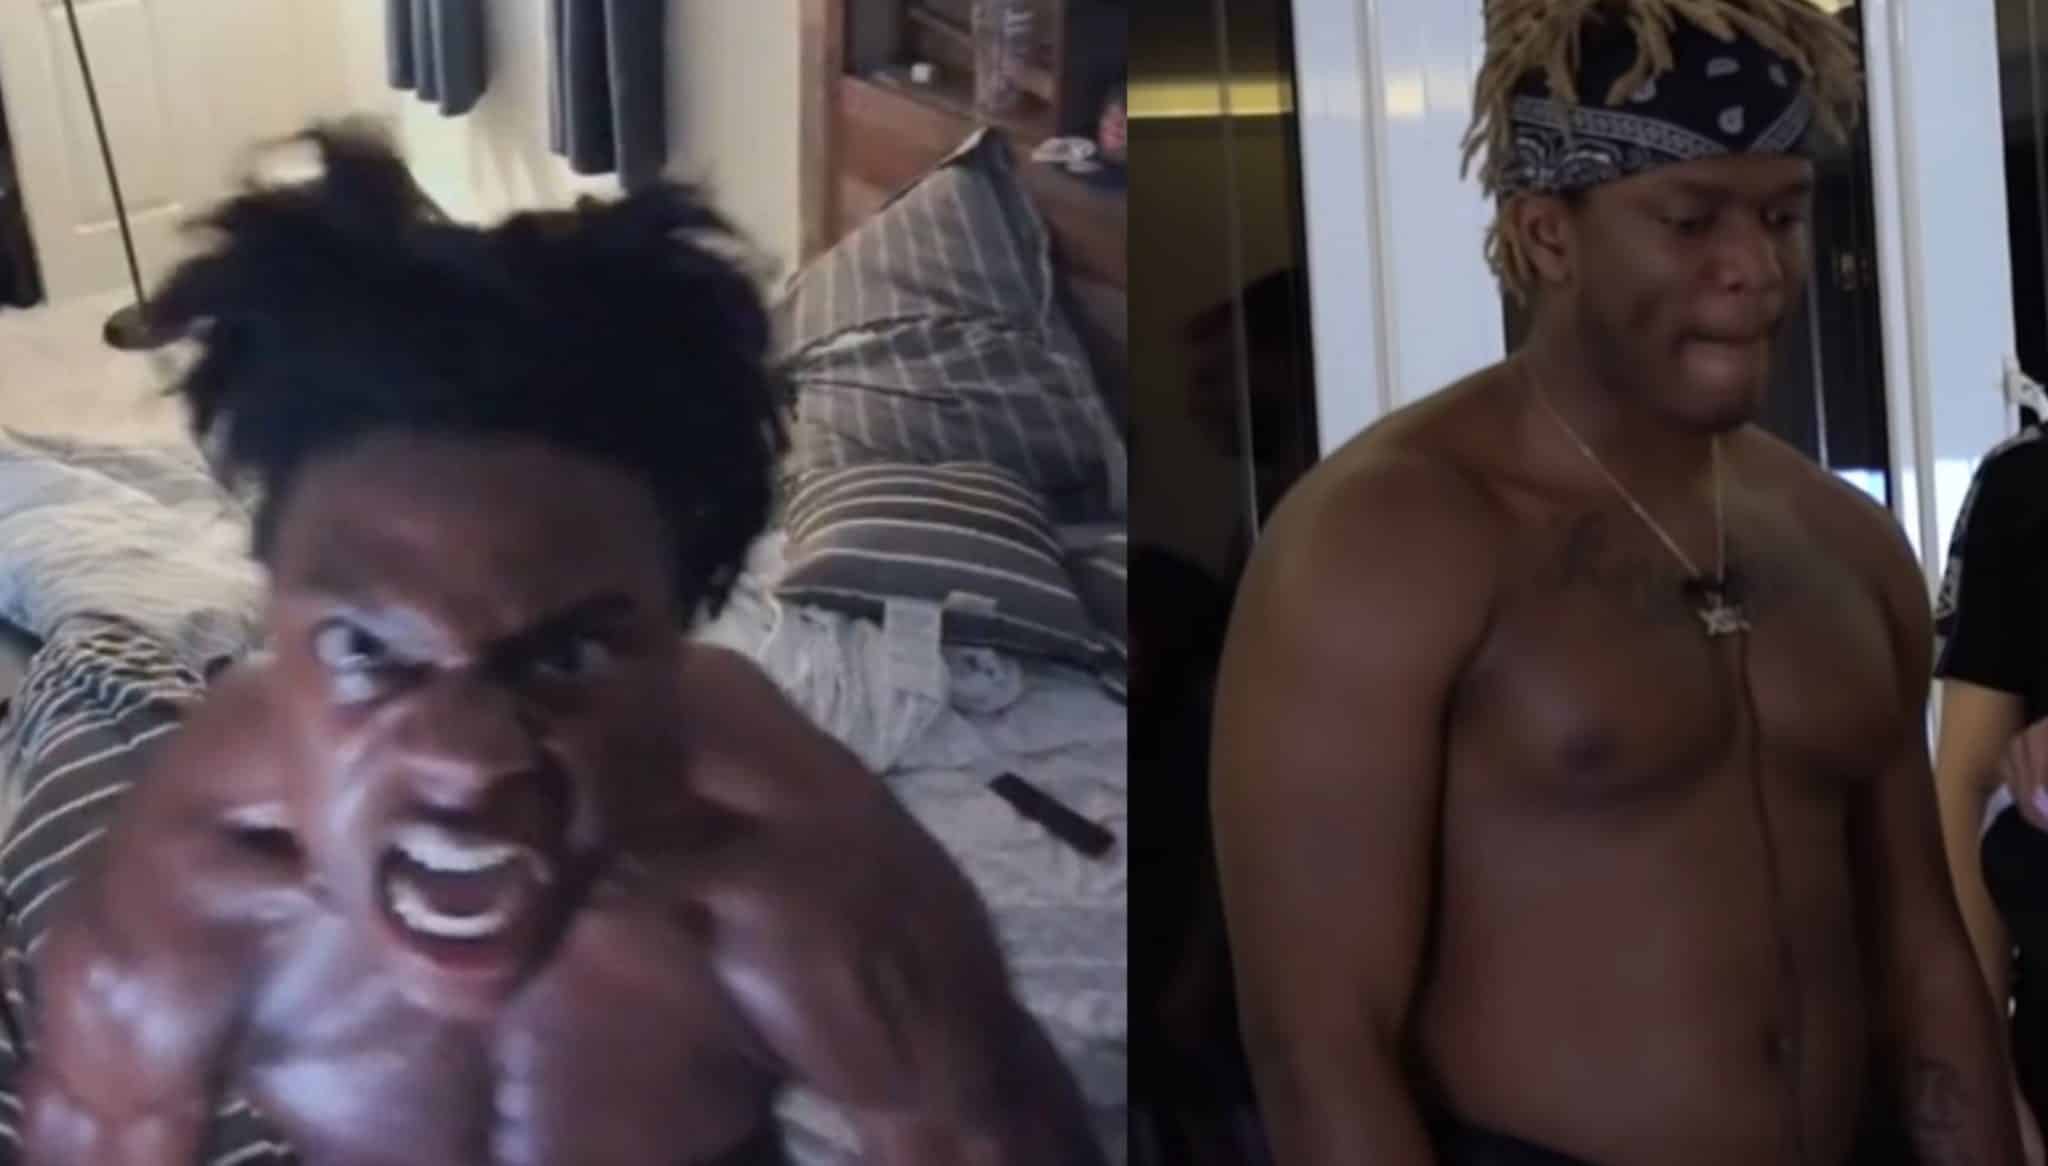 IShowSpeed claps back at KSI amid fight speculation: “I would win” - Dexerto